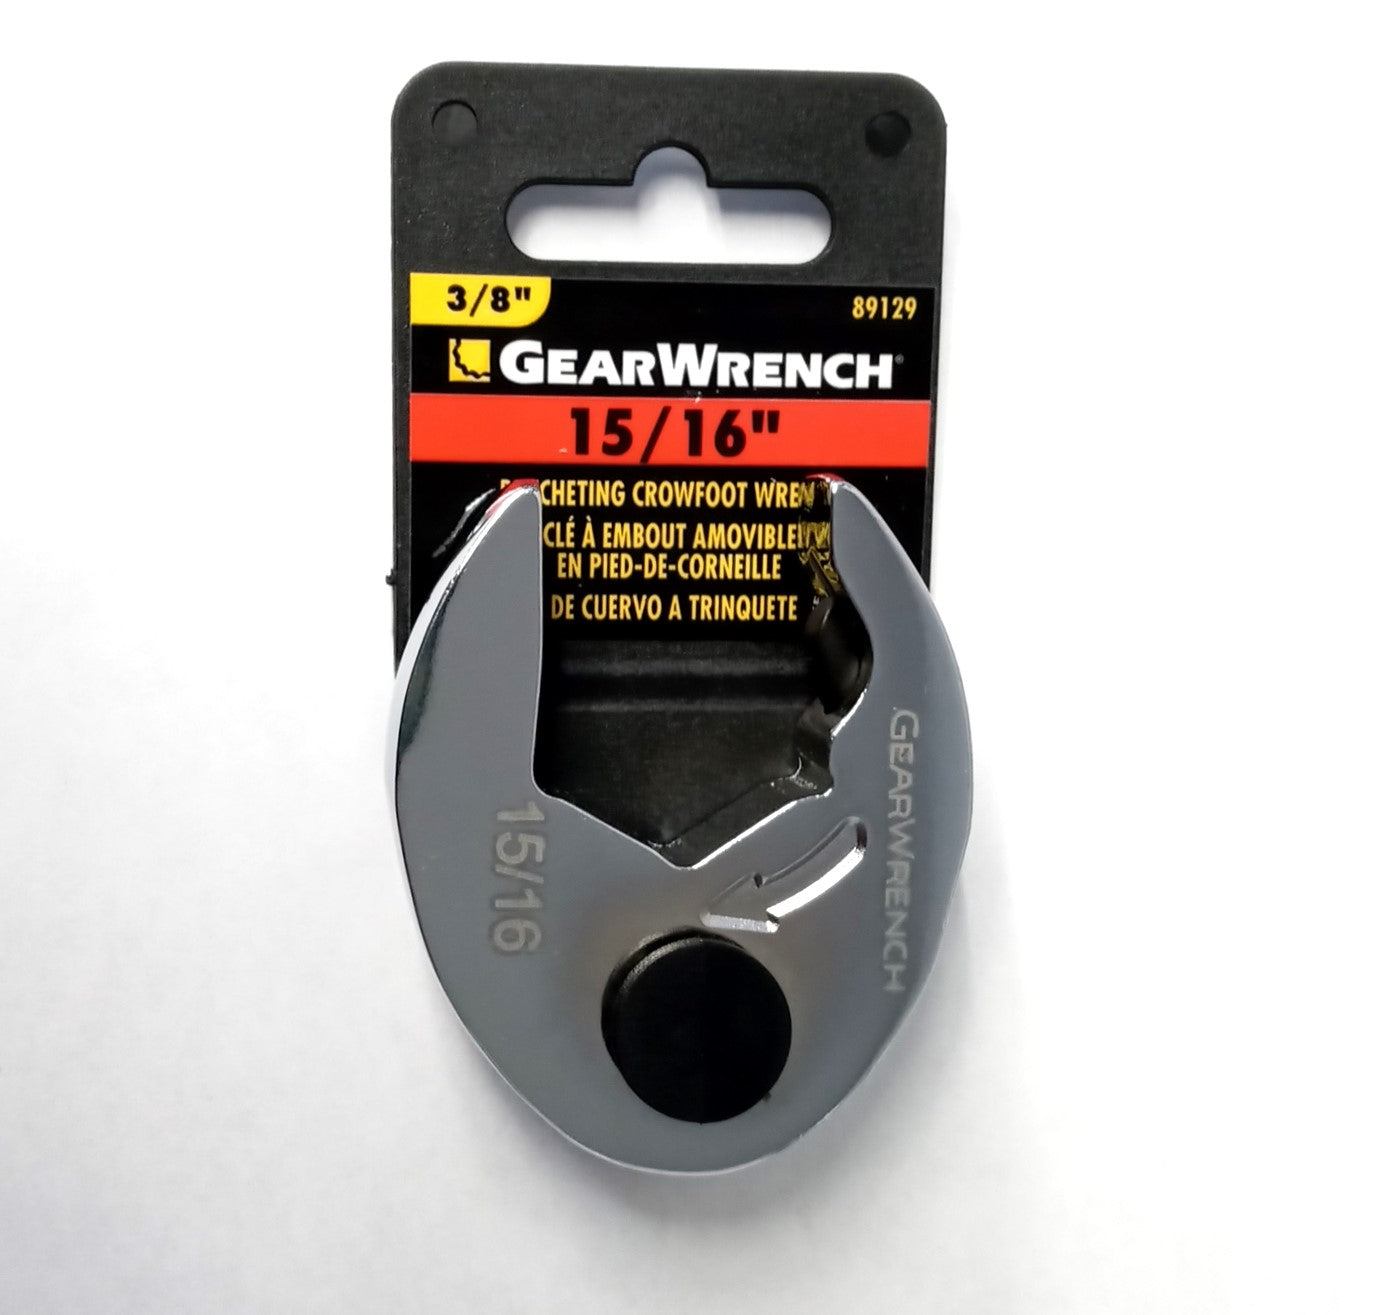 GEARWRENCH 89129 3/8" Drive 15/16"  Ratcheting Crowfoot SAE Wrench